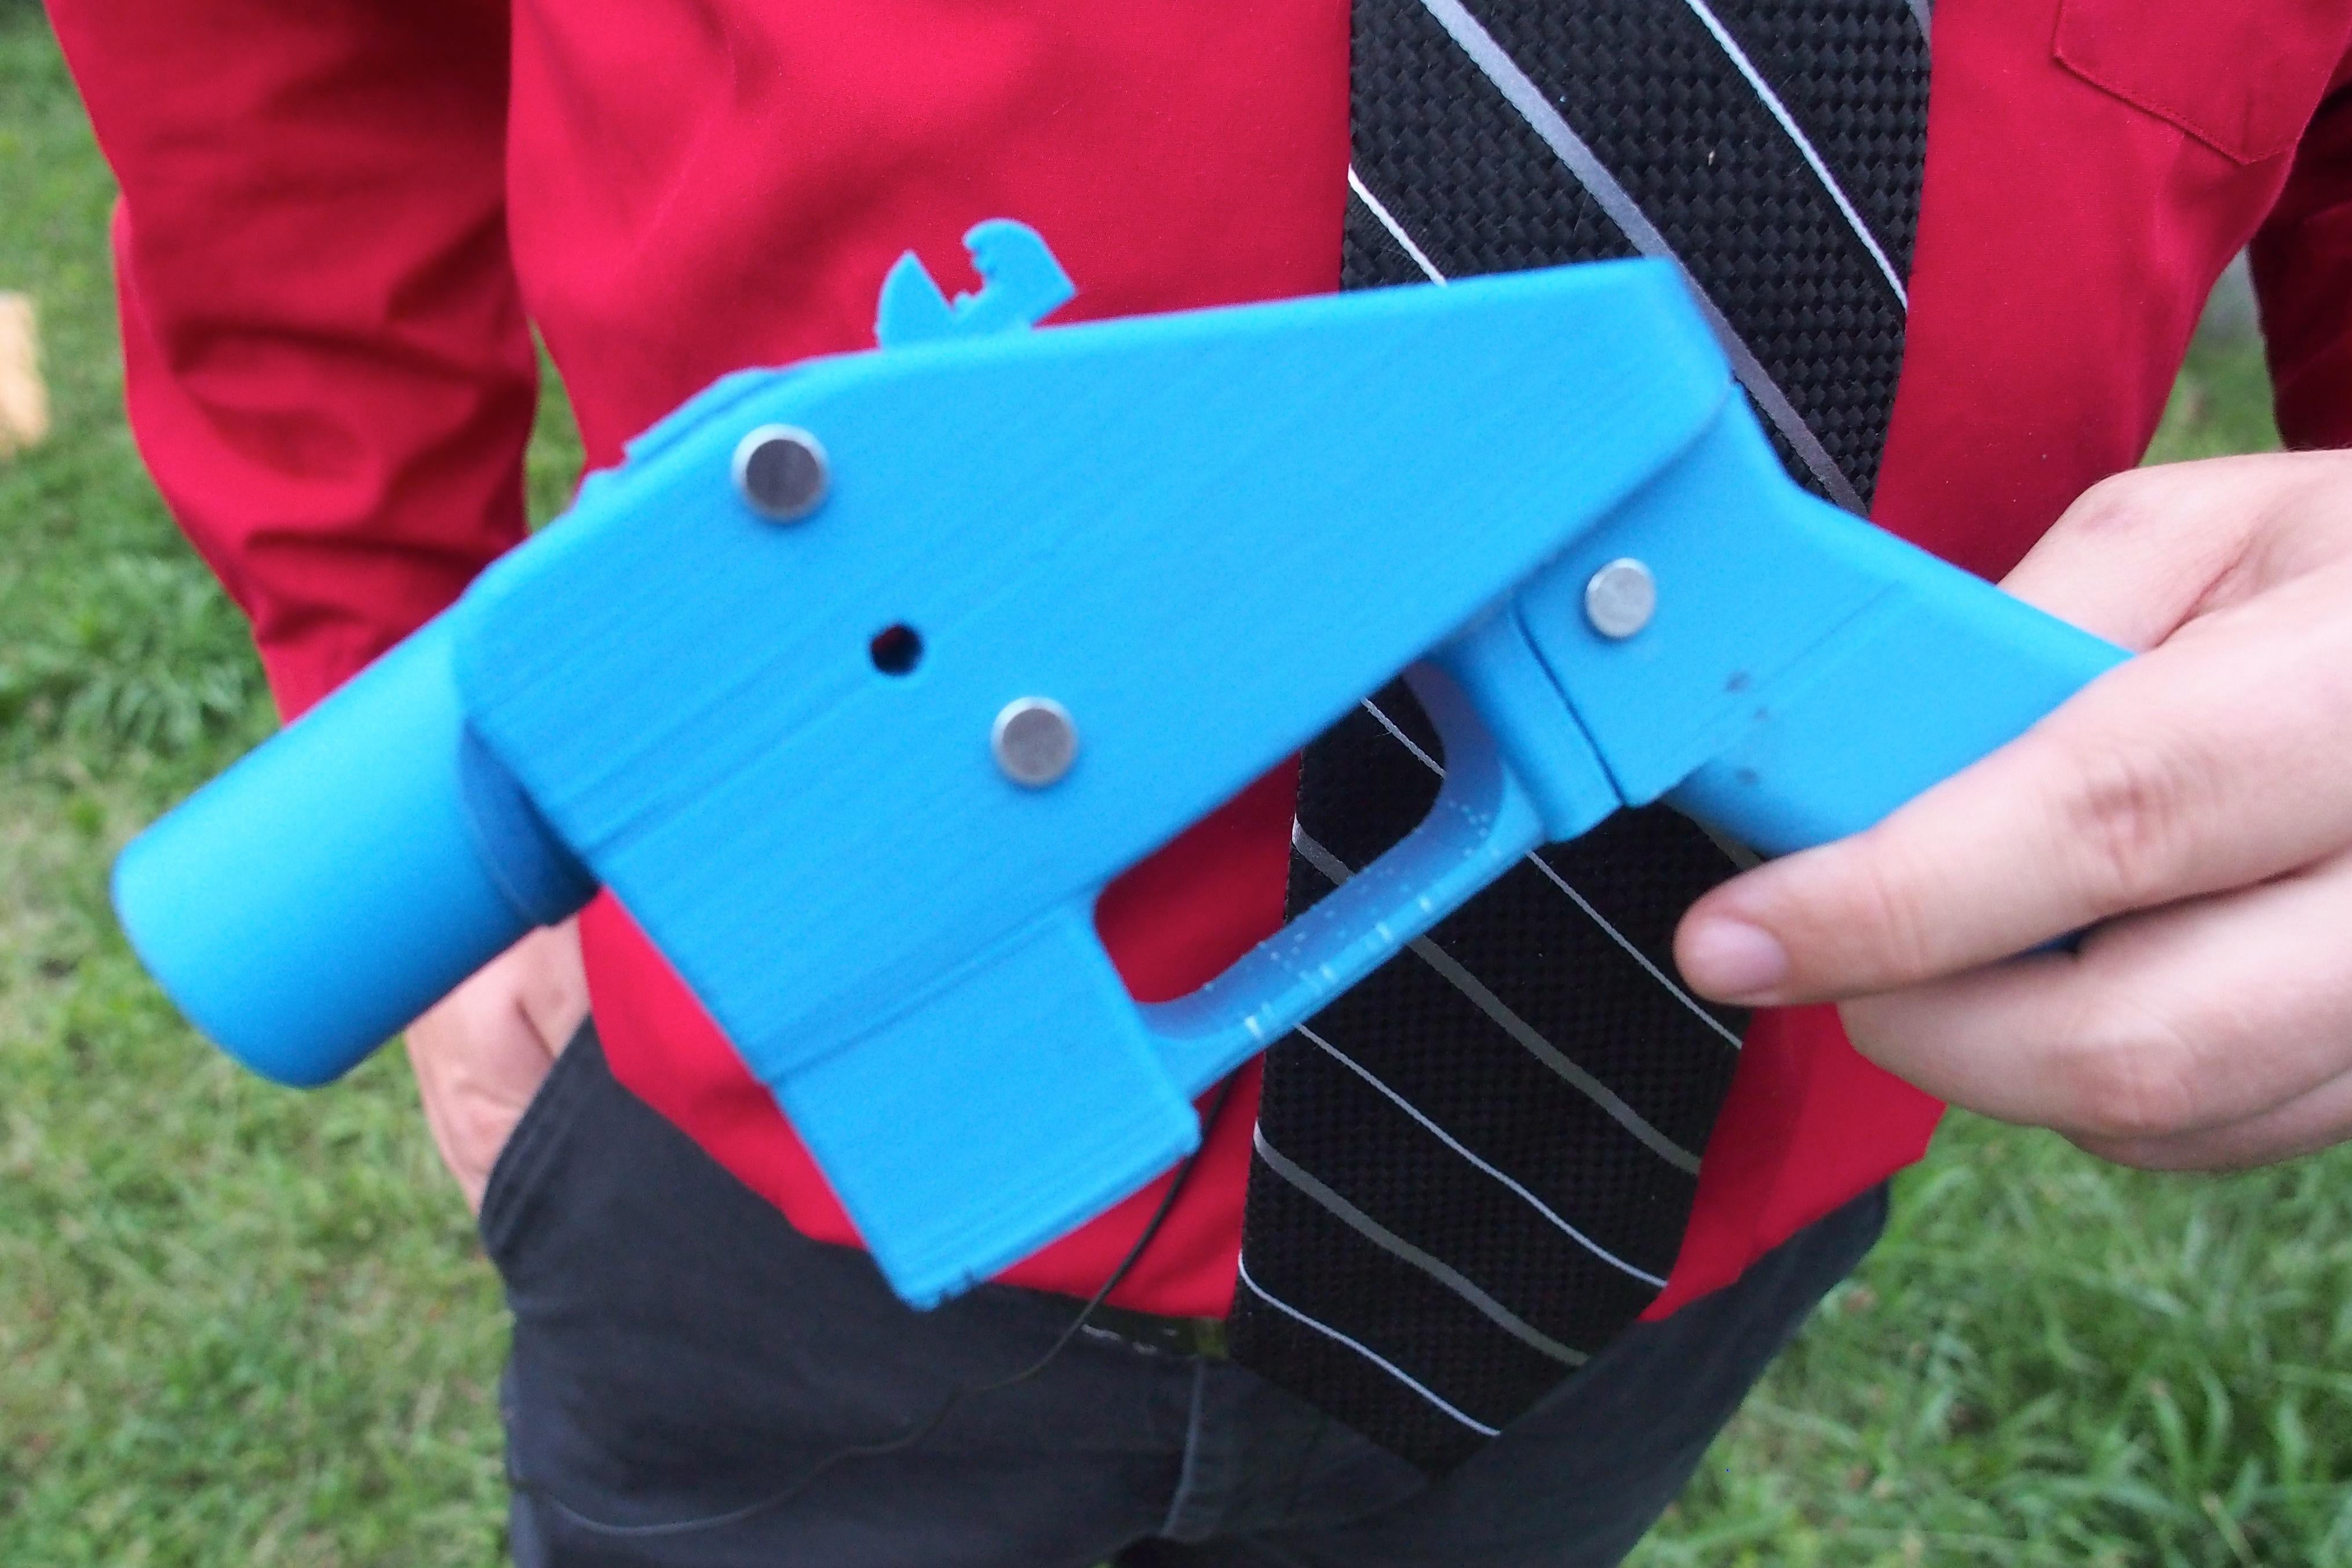 Defense Distributed developed the first 3D-printed gun, the Liberator pistol, in 2013.  